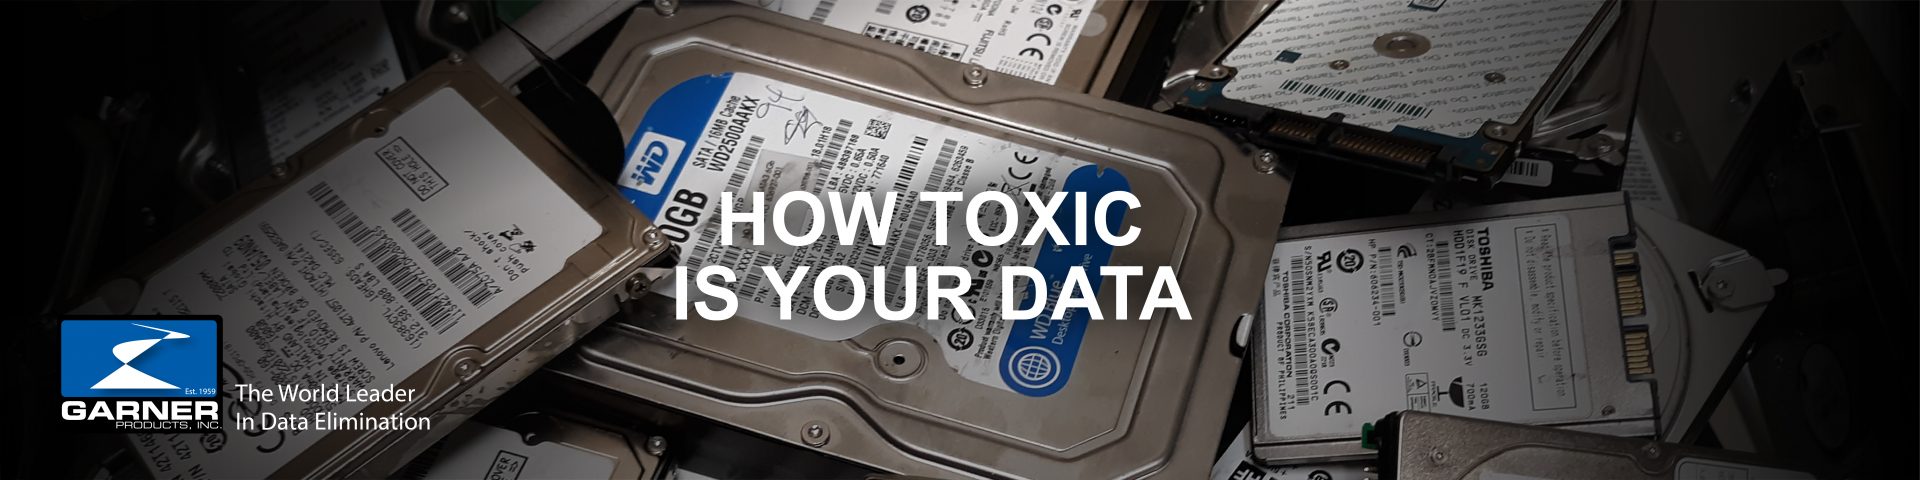 how-toxic-is-your-data-07-1920x480